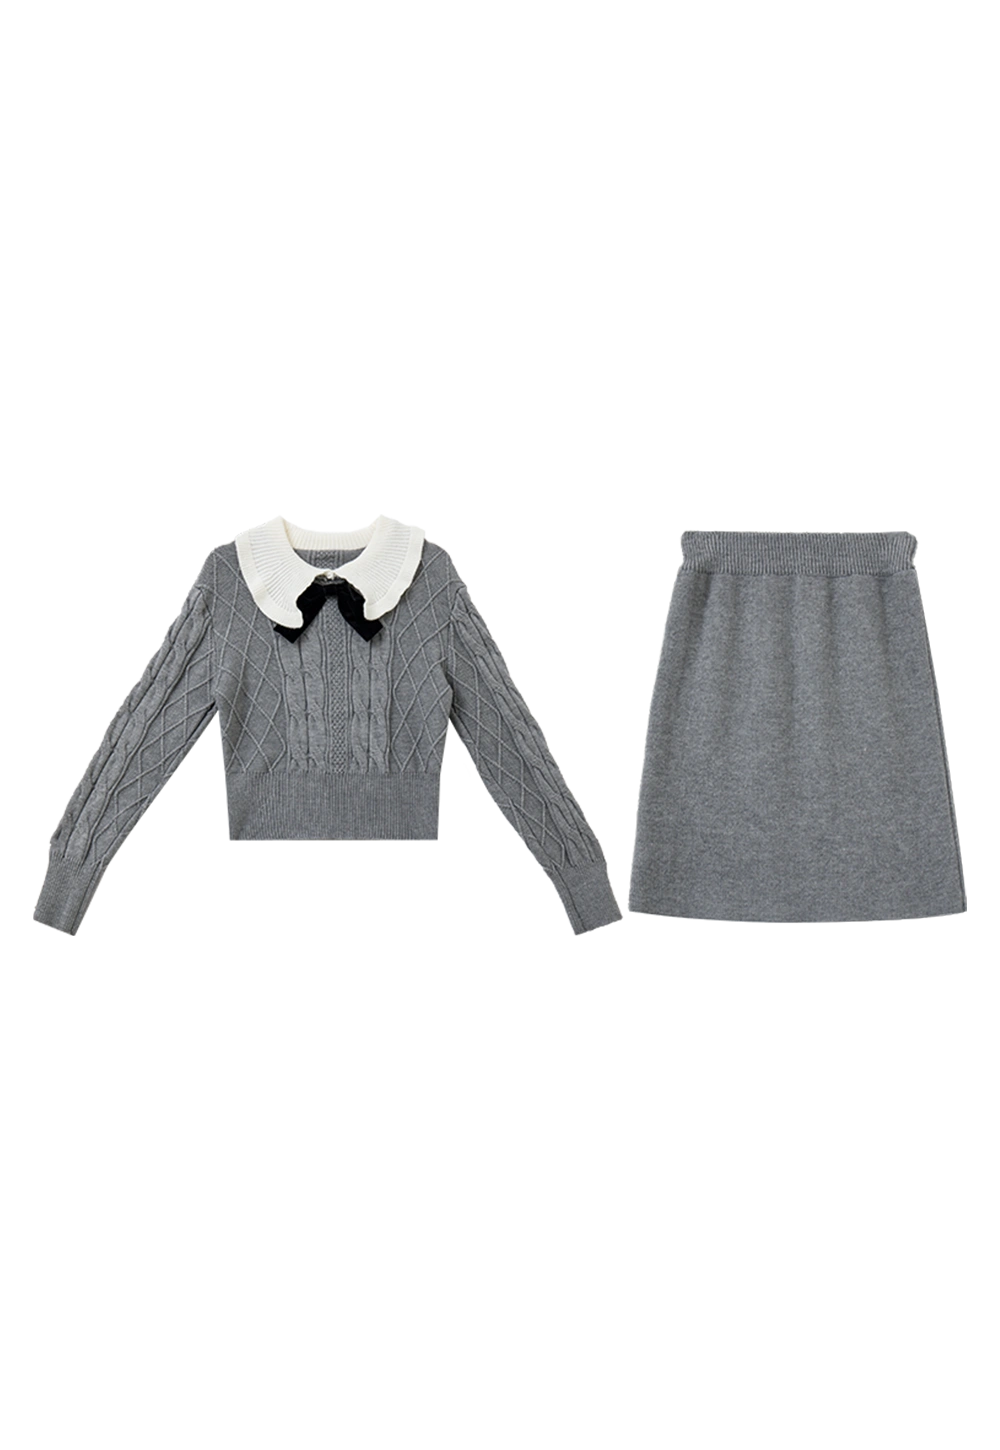 Women's Two-Piece Knit Set - Cable Knit Sweater with Contrasting Collar and Bow Detail